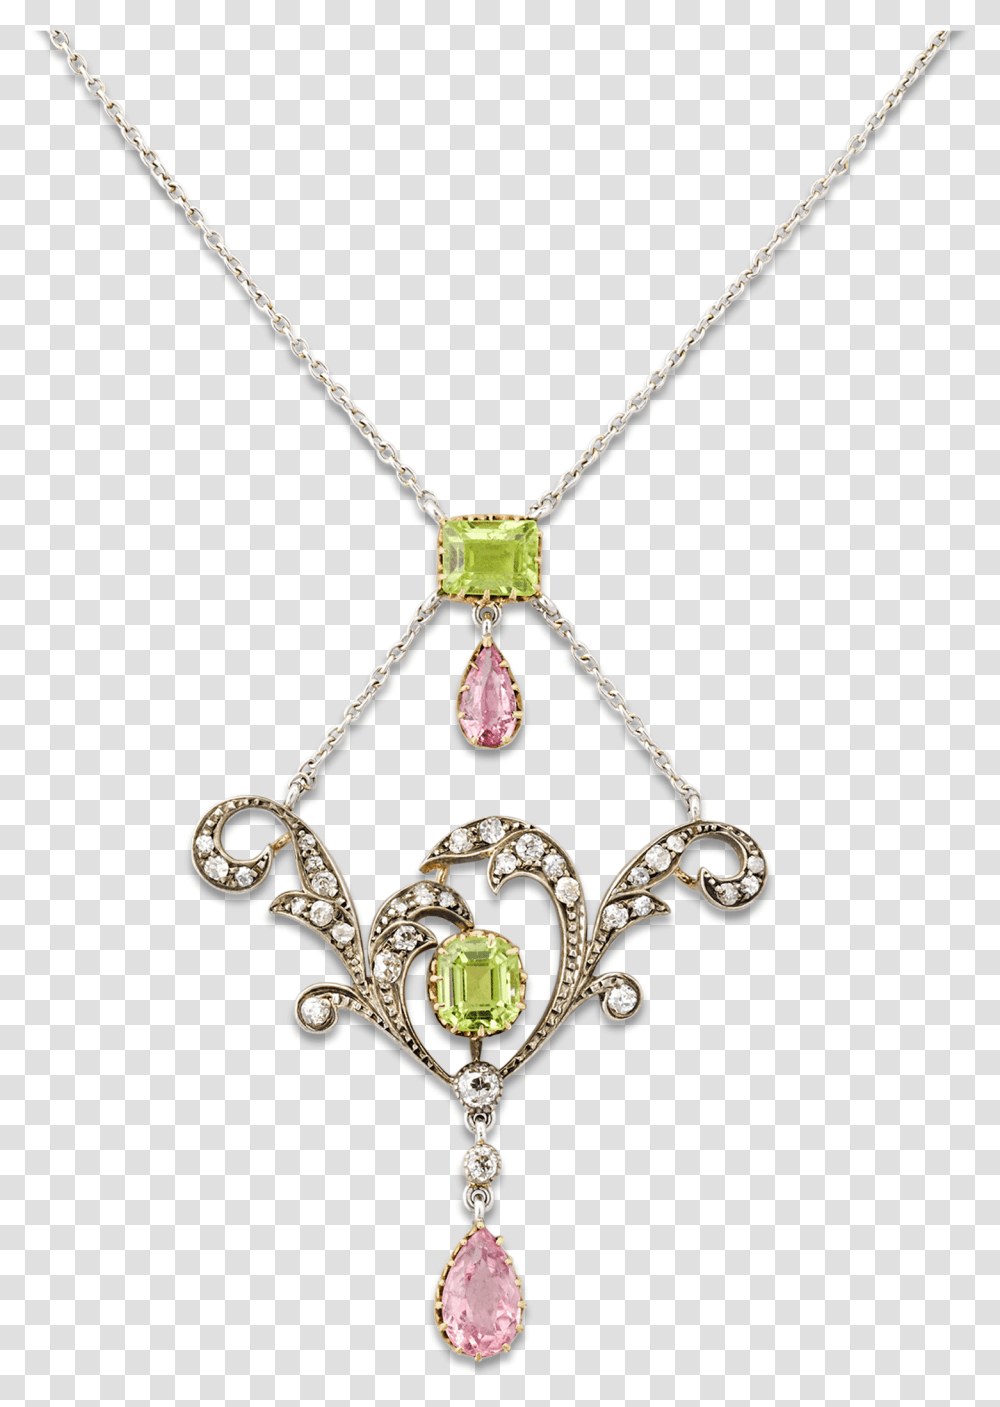 Locket, Accessories, Accessory, Jewelry, Pendant Transparent Png